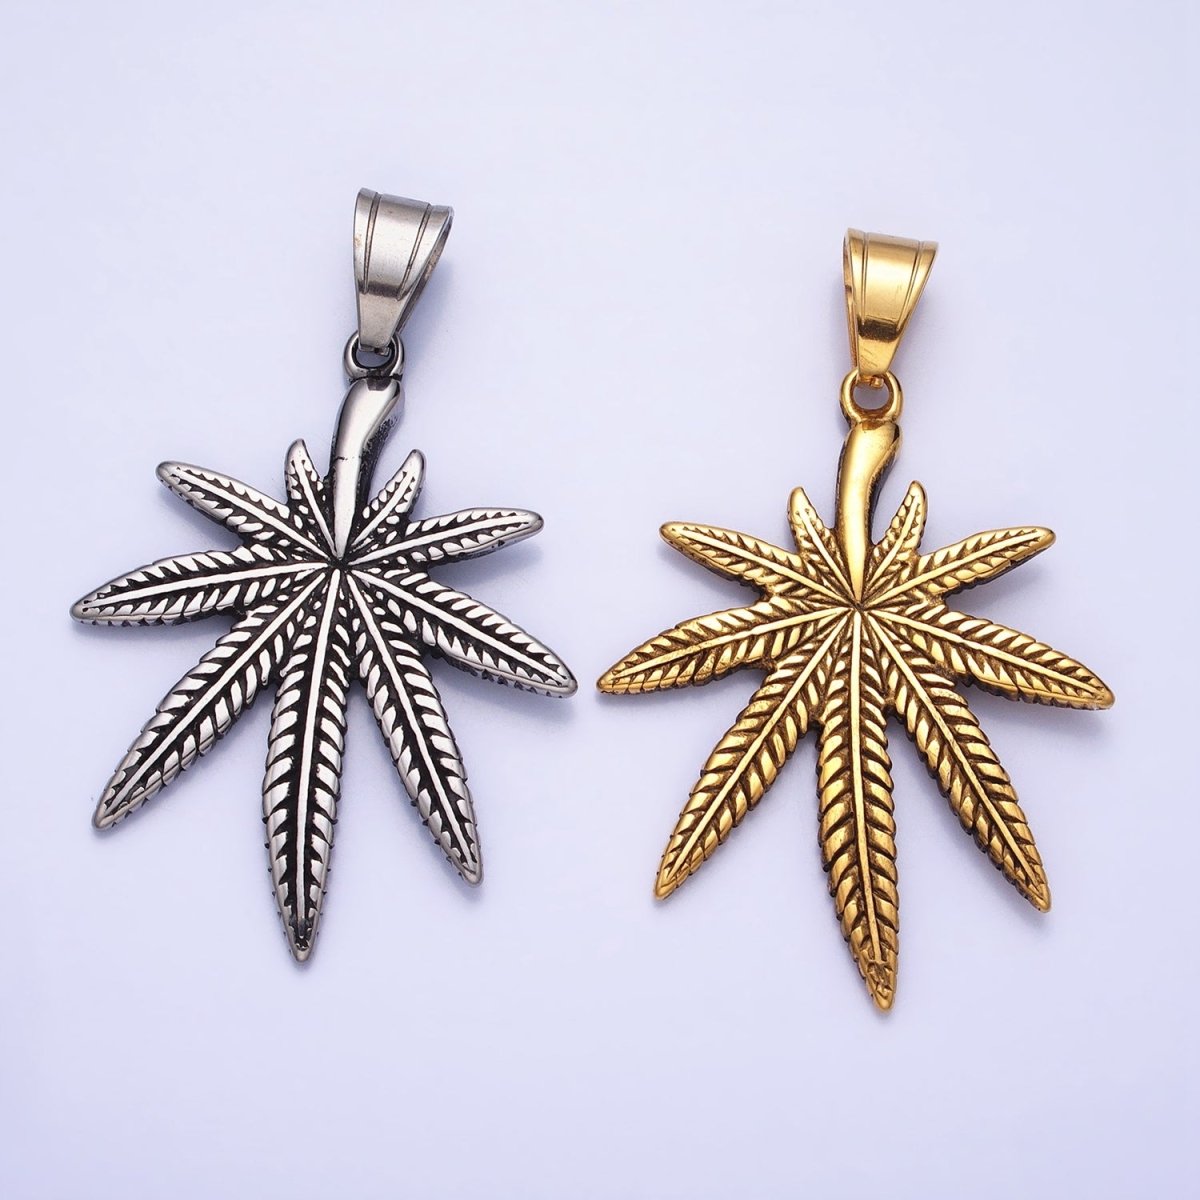 Stainless Steel Weed Leaf Statement 58mm Pendant in Silver & Gold | P1132 - DLUXCA